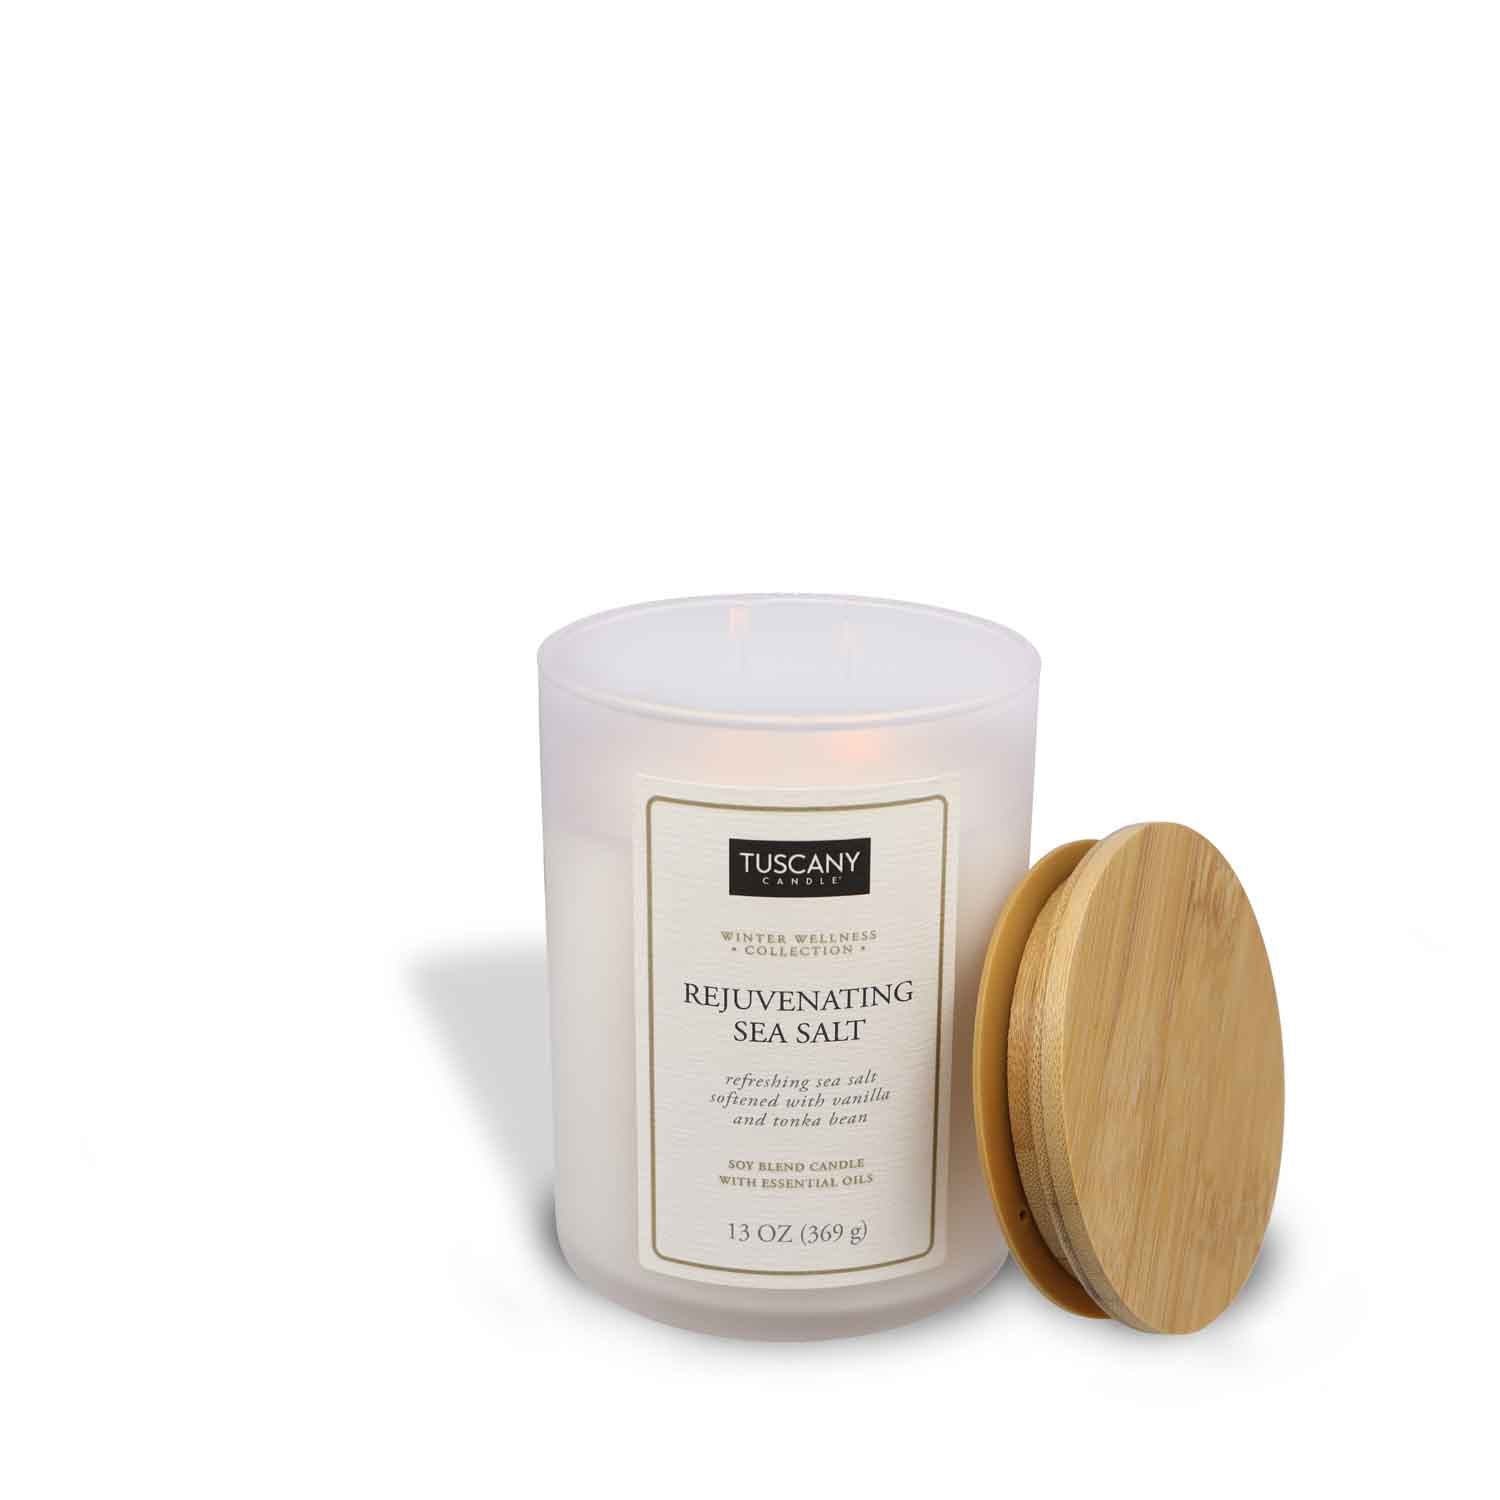 Aromatherapy candle named Refreshing Sea Salt, exuding serenity with its white wax and presented in a chic matte-finished colored glass jar.